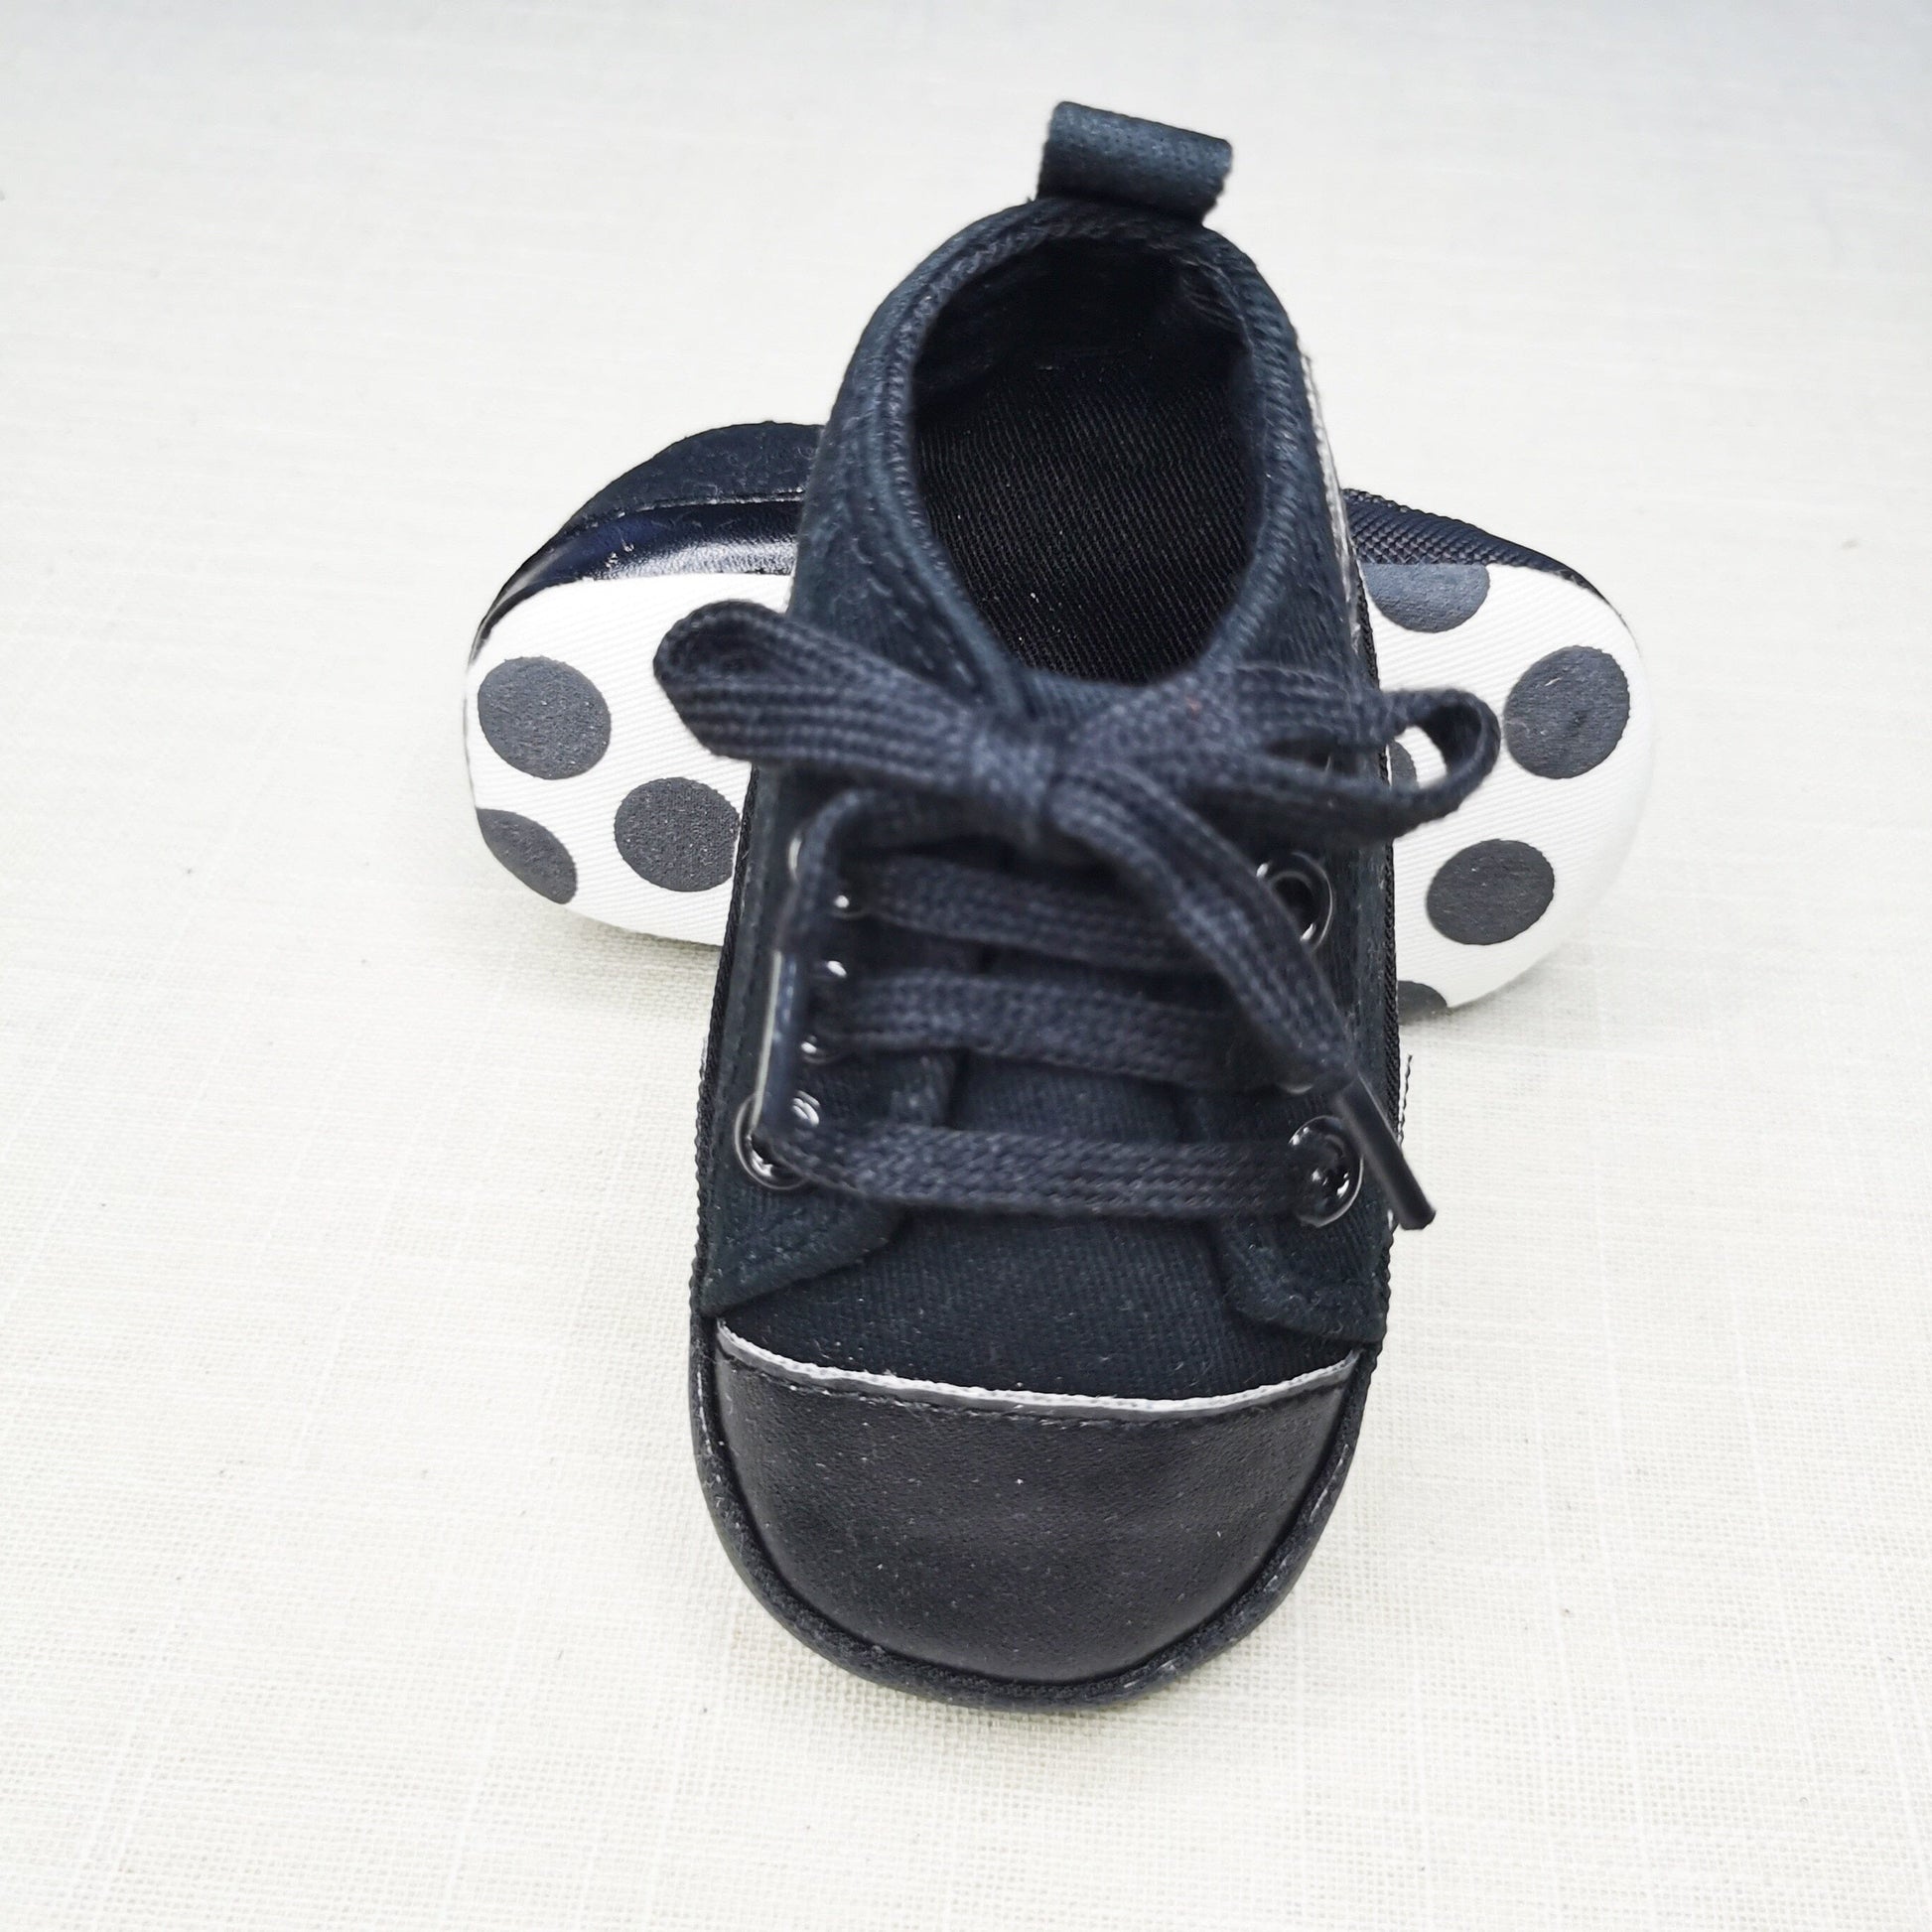 Baby Canvas Classic Sneakers Newborn Print Star Sports Baby Boys Girls First Walkers Shoes Infant Toddler Anti-slip Baby Shoes Hilo shop allblack 0-6 Months(11cm) China